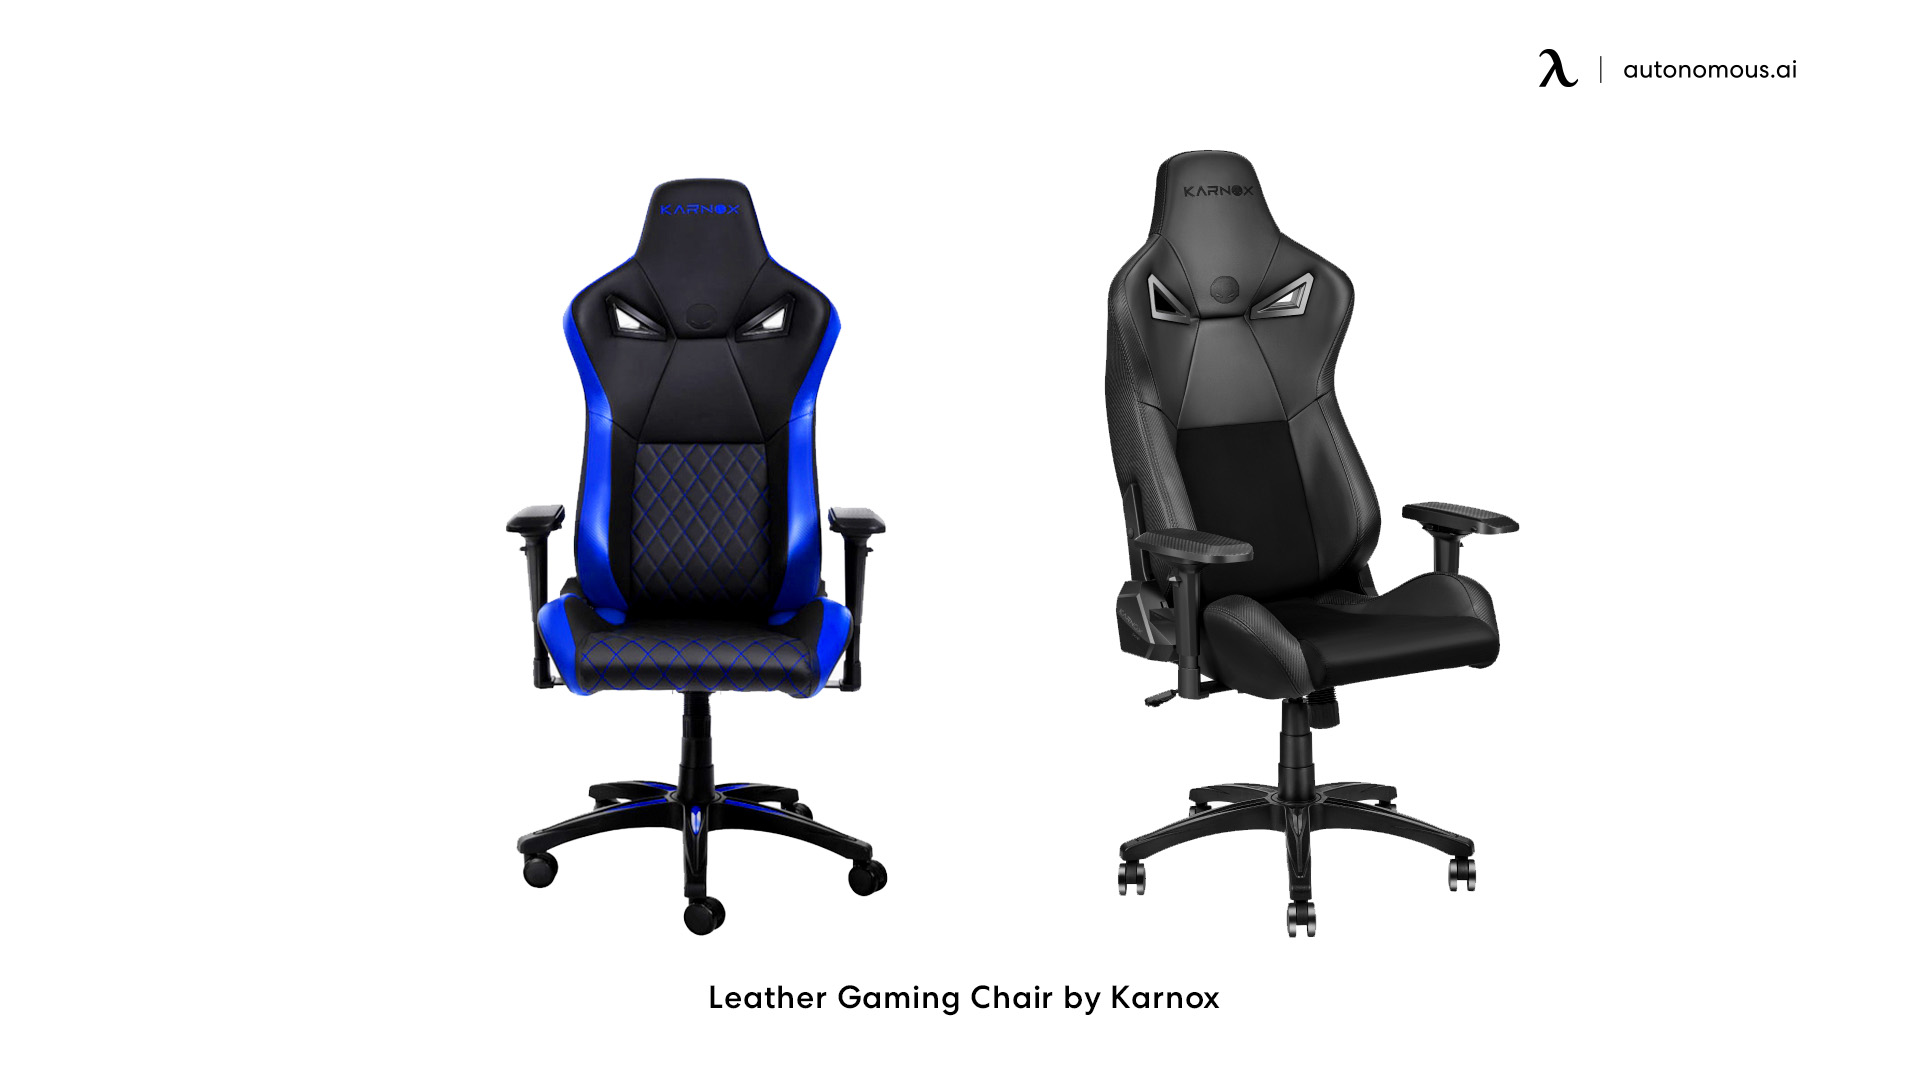 Karnox Leather gaming chair under $400